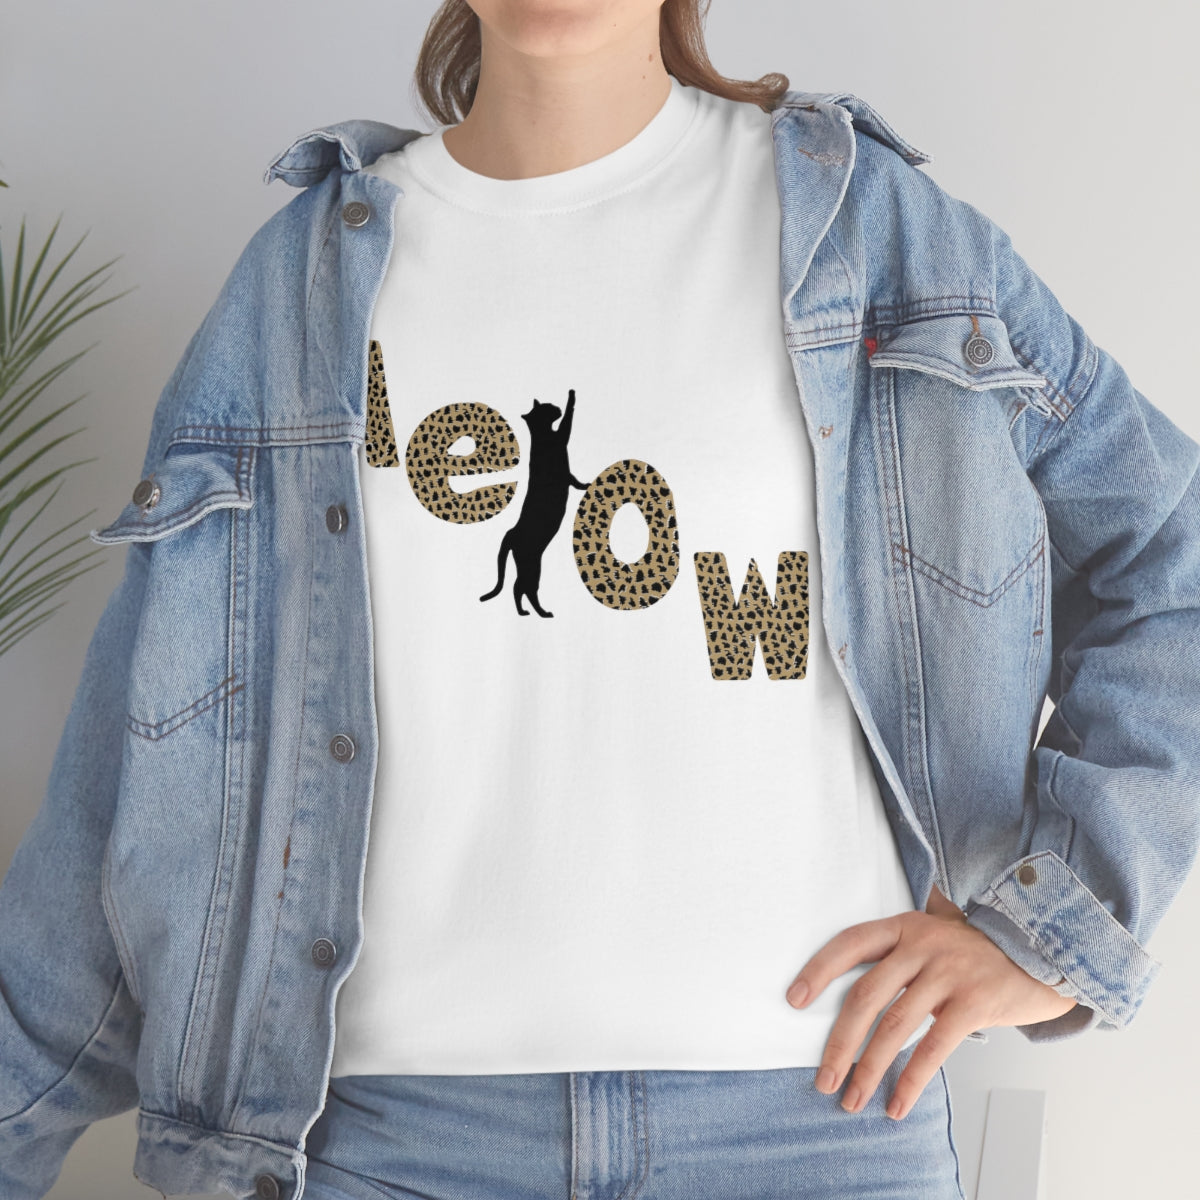 " Meow" with Black Cat   Cotton Tee shirt